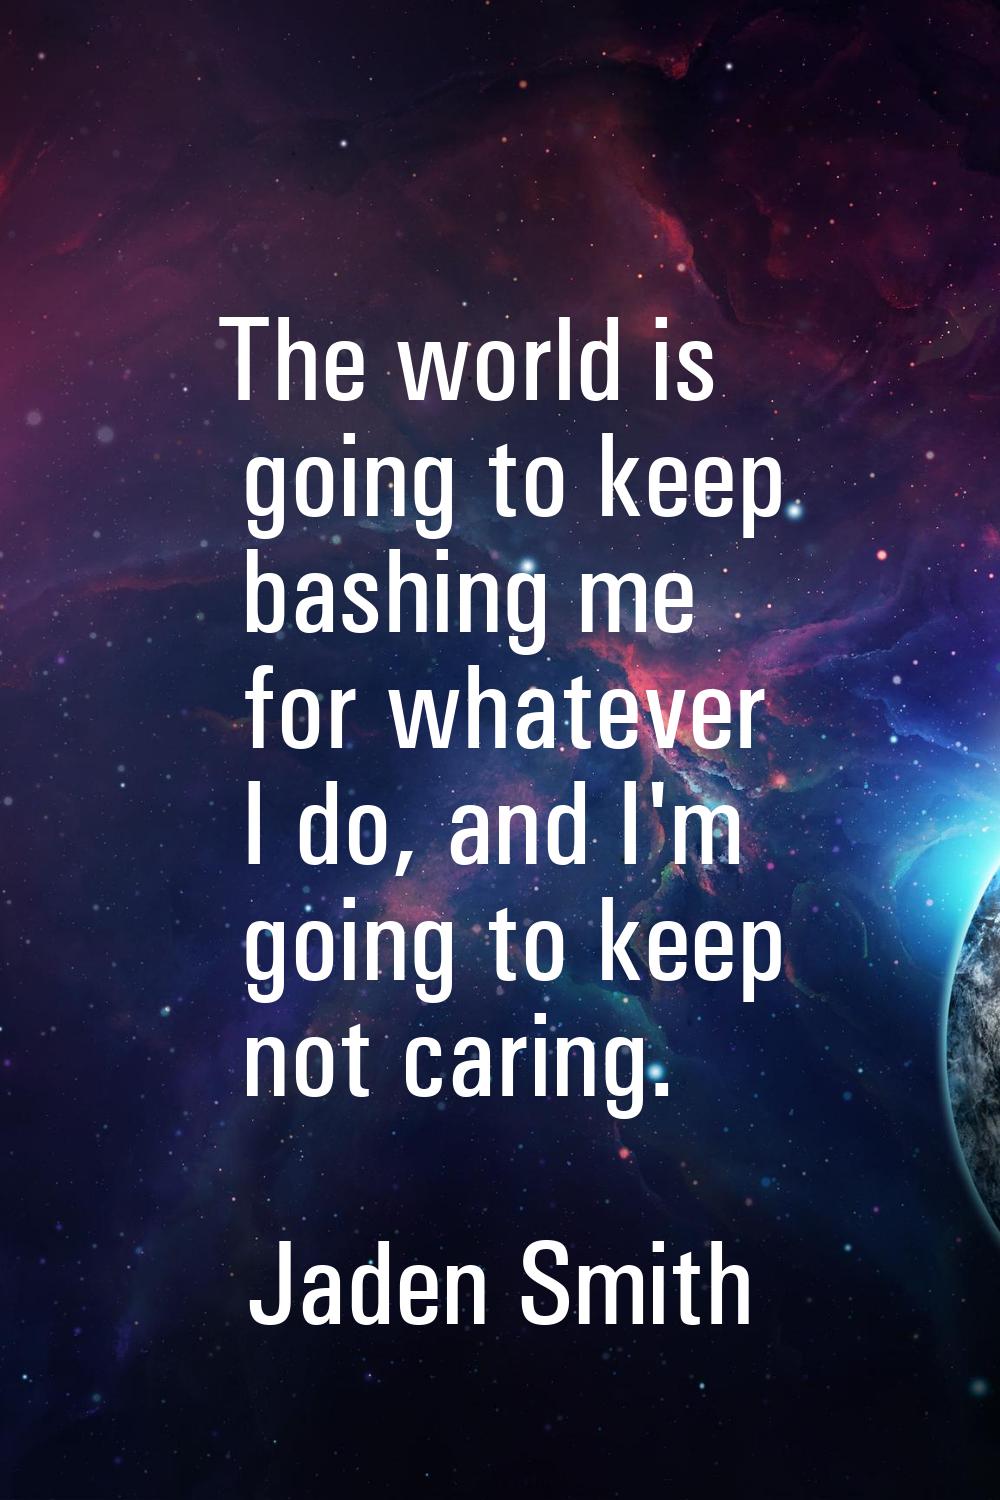 The world is going to keep bashing me for whatever I do, and I'm going to keep not caring.